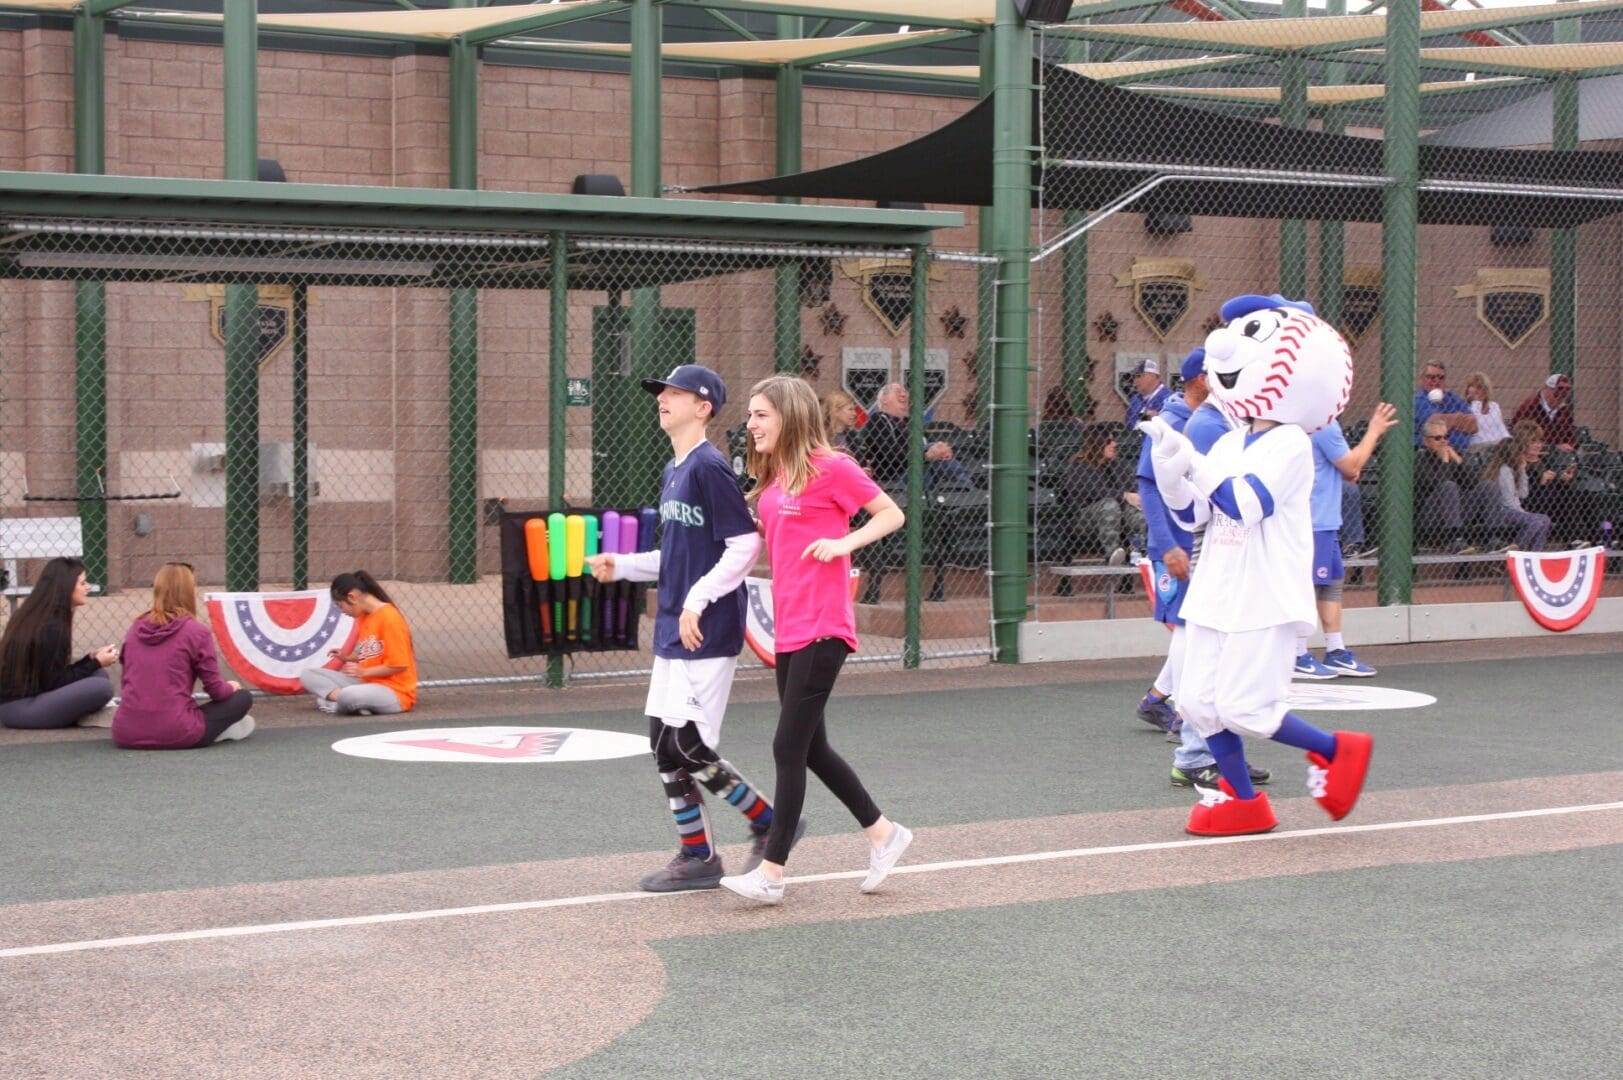 A group of people walking on a baseball field with a mascot.